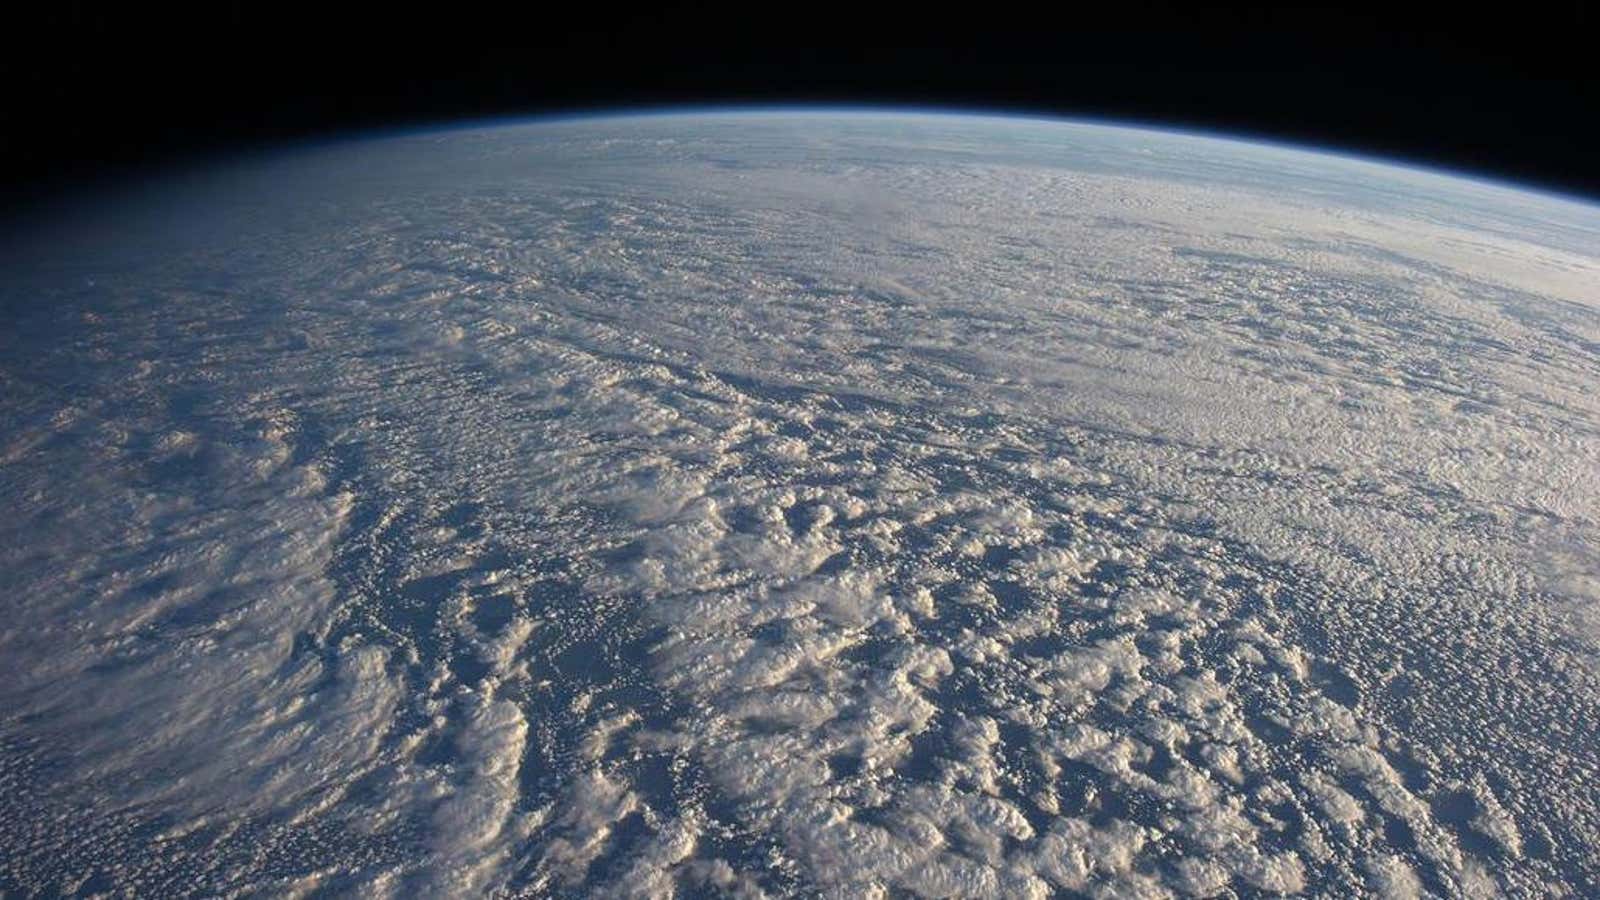 Global break-up of stratocumulus clouds could spike warming.